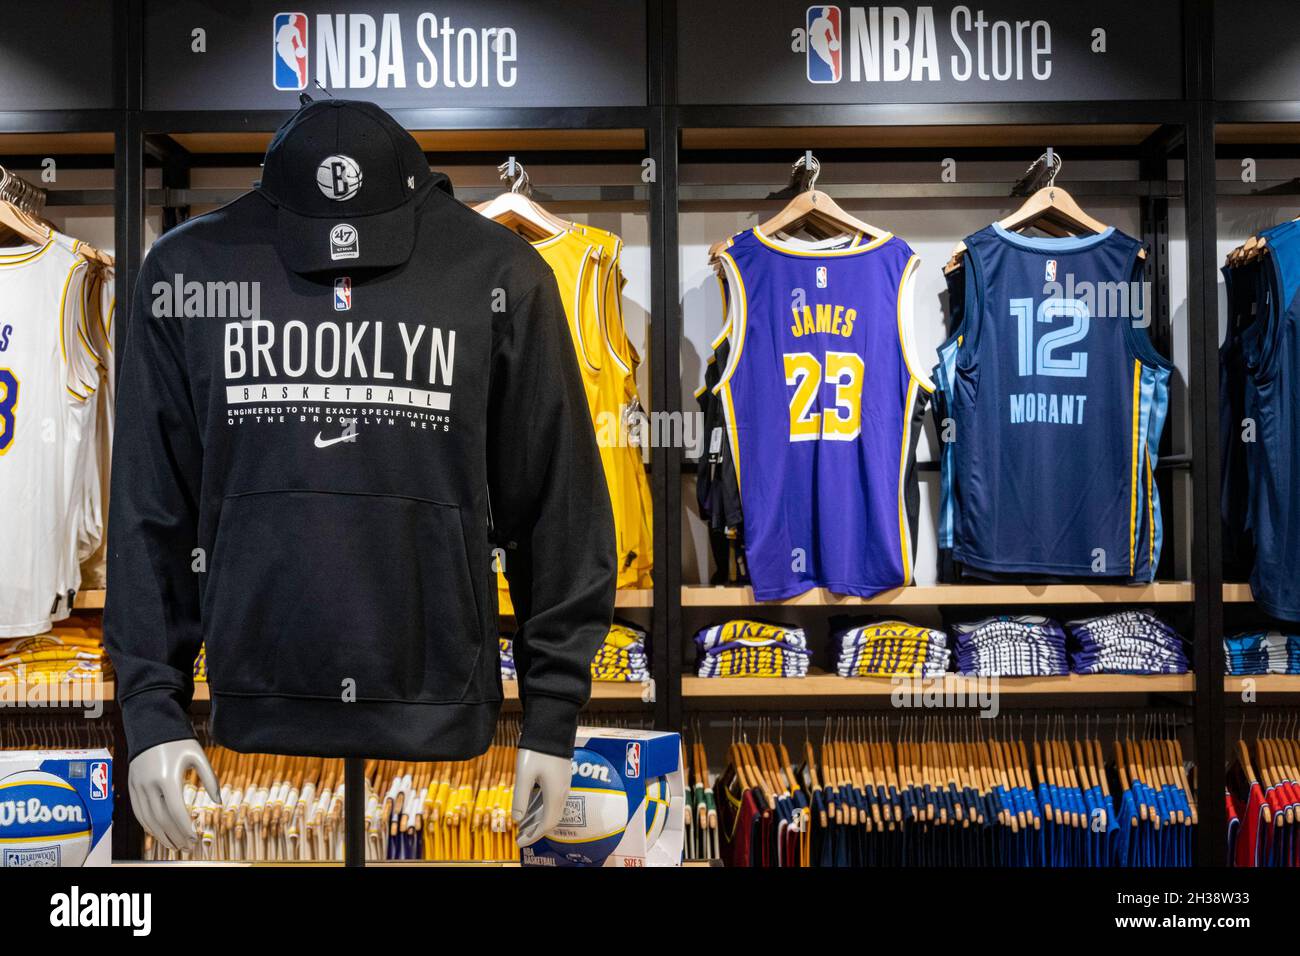 Nba store nyc hi-res stock photography and images - Alamy